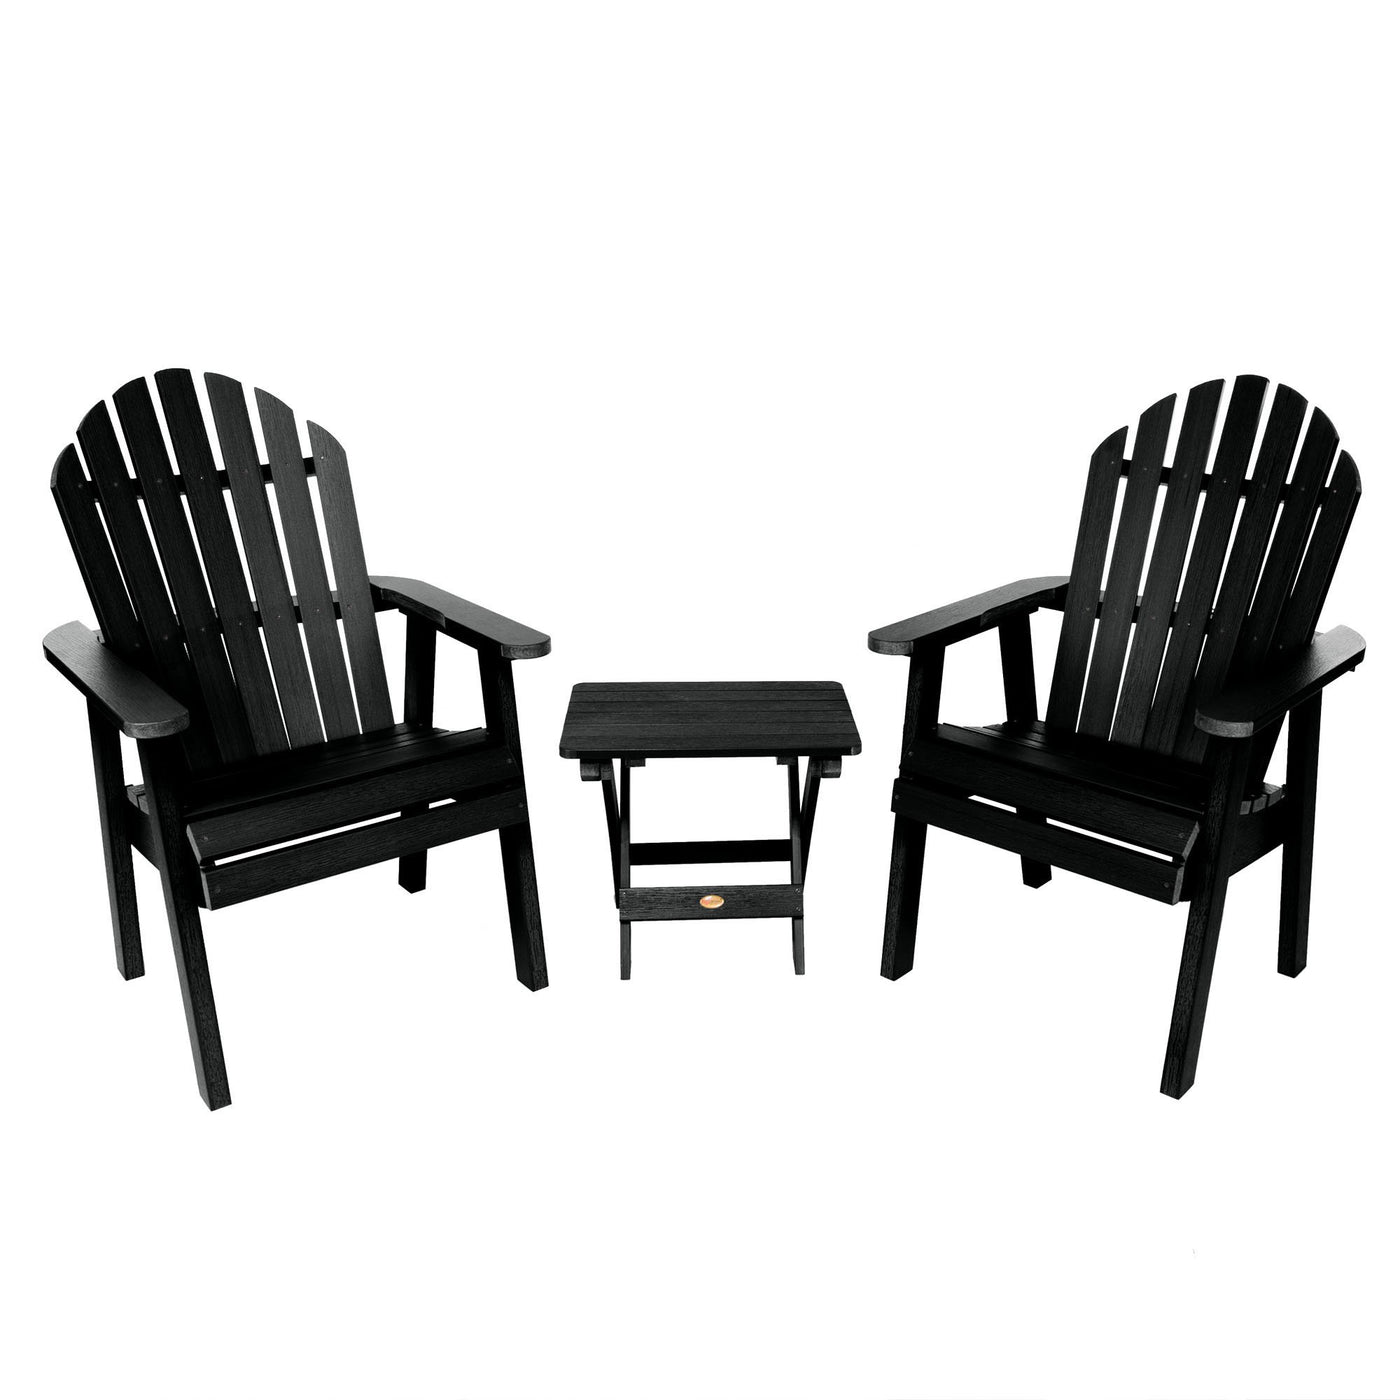 2 Hamilton Deck Chairs with Folding Side Table Highwood USA Black 